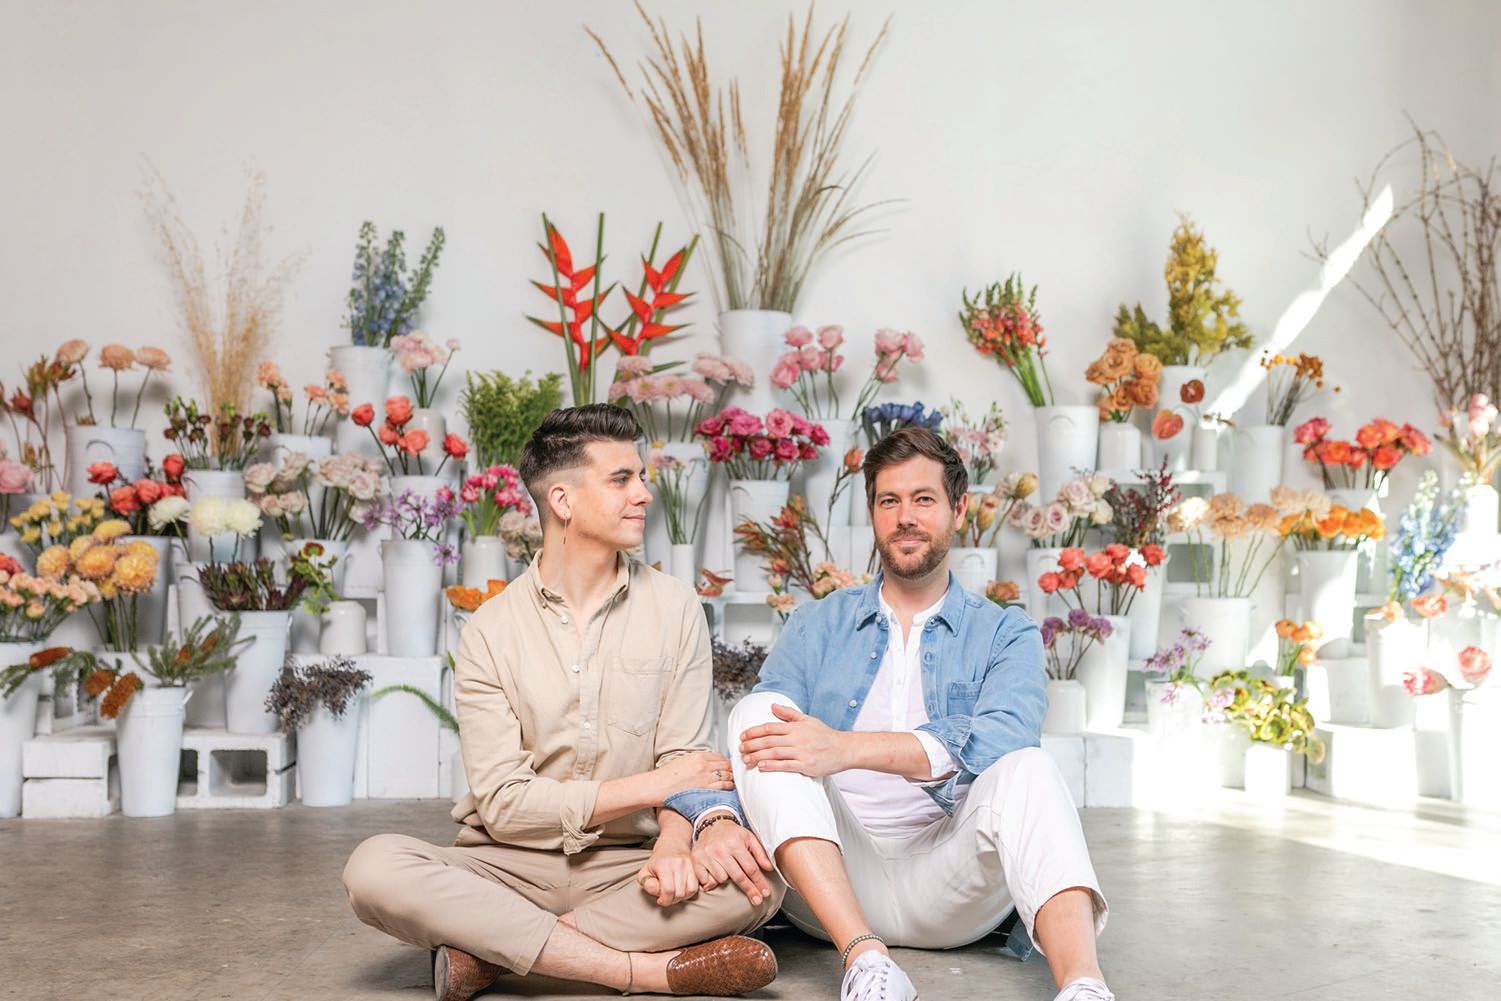 Emerson Boyle and Benjamin Boso, owners of Ampersand PHOTO BY COME PLUM/PRAISE SANTOS